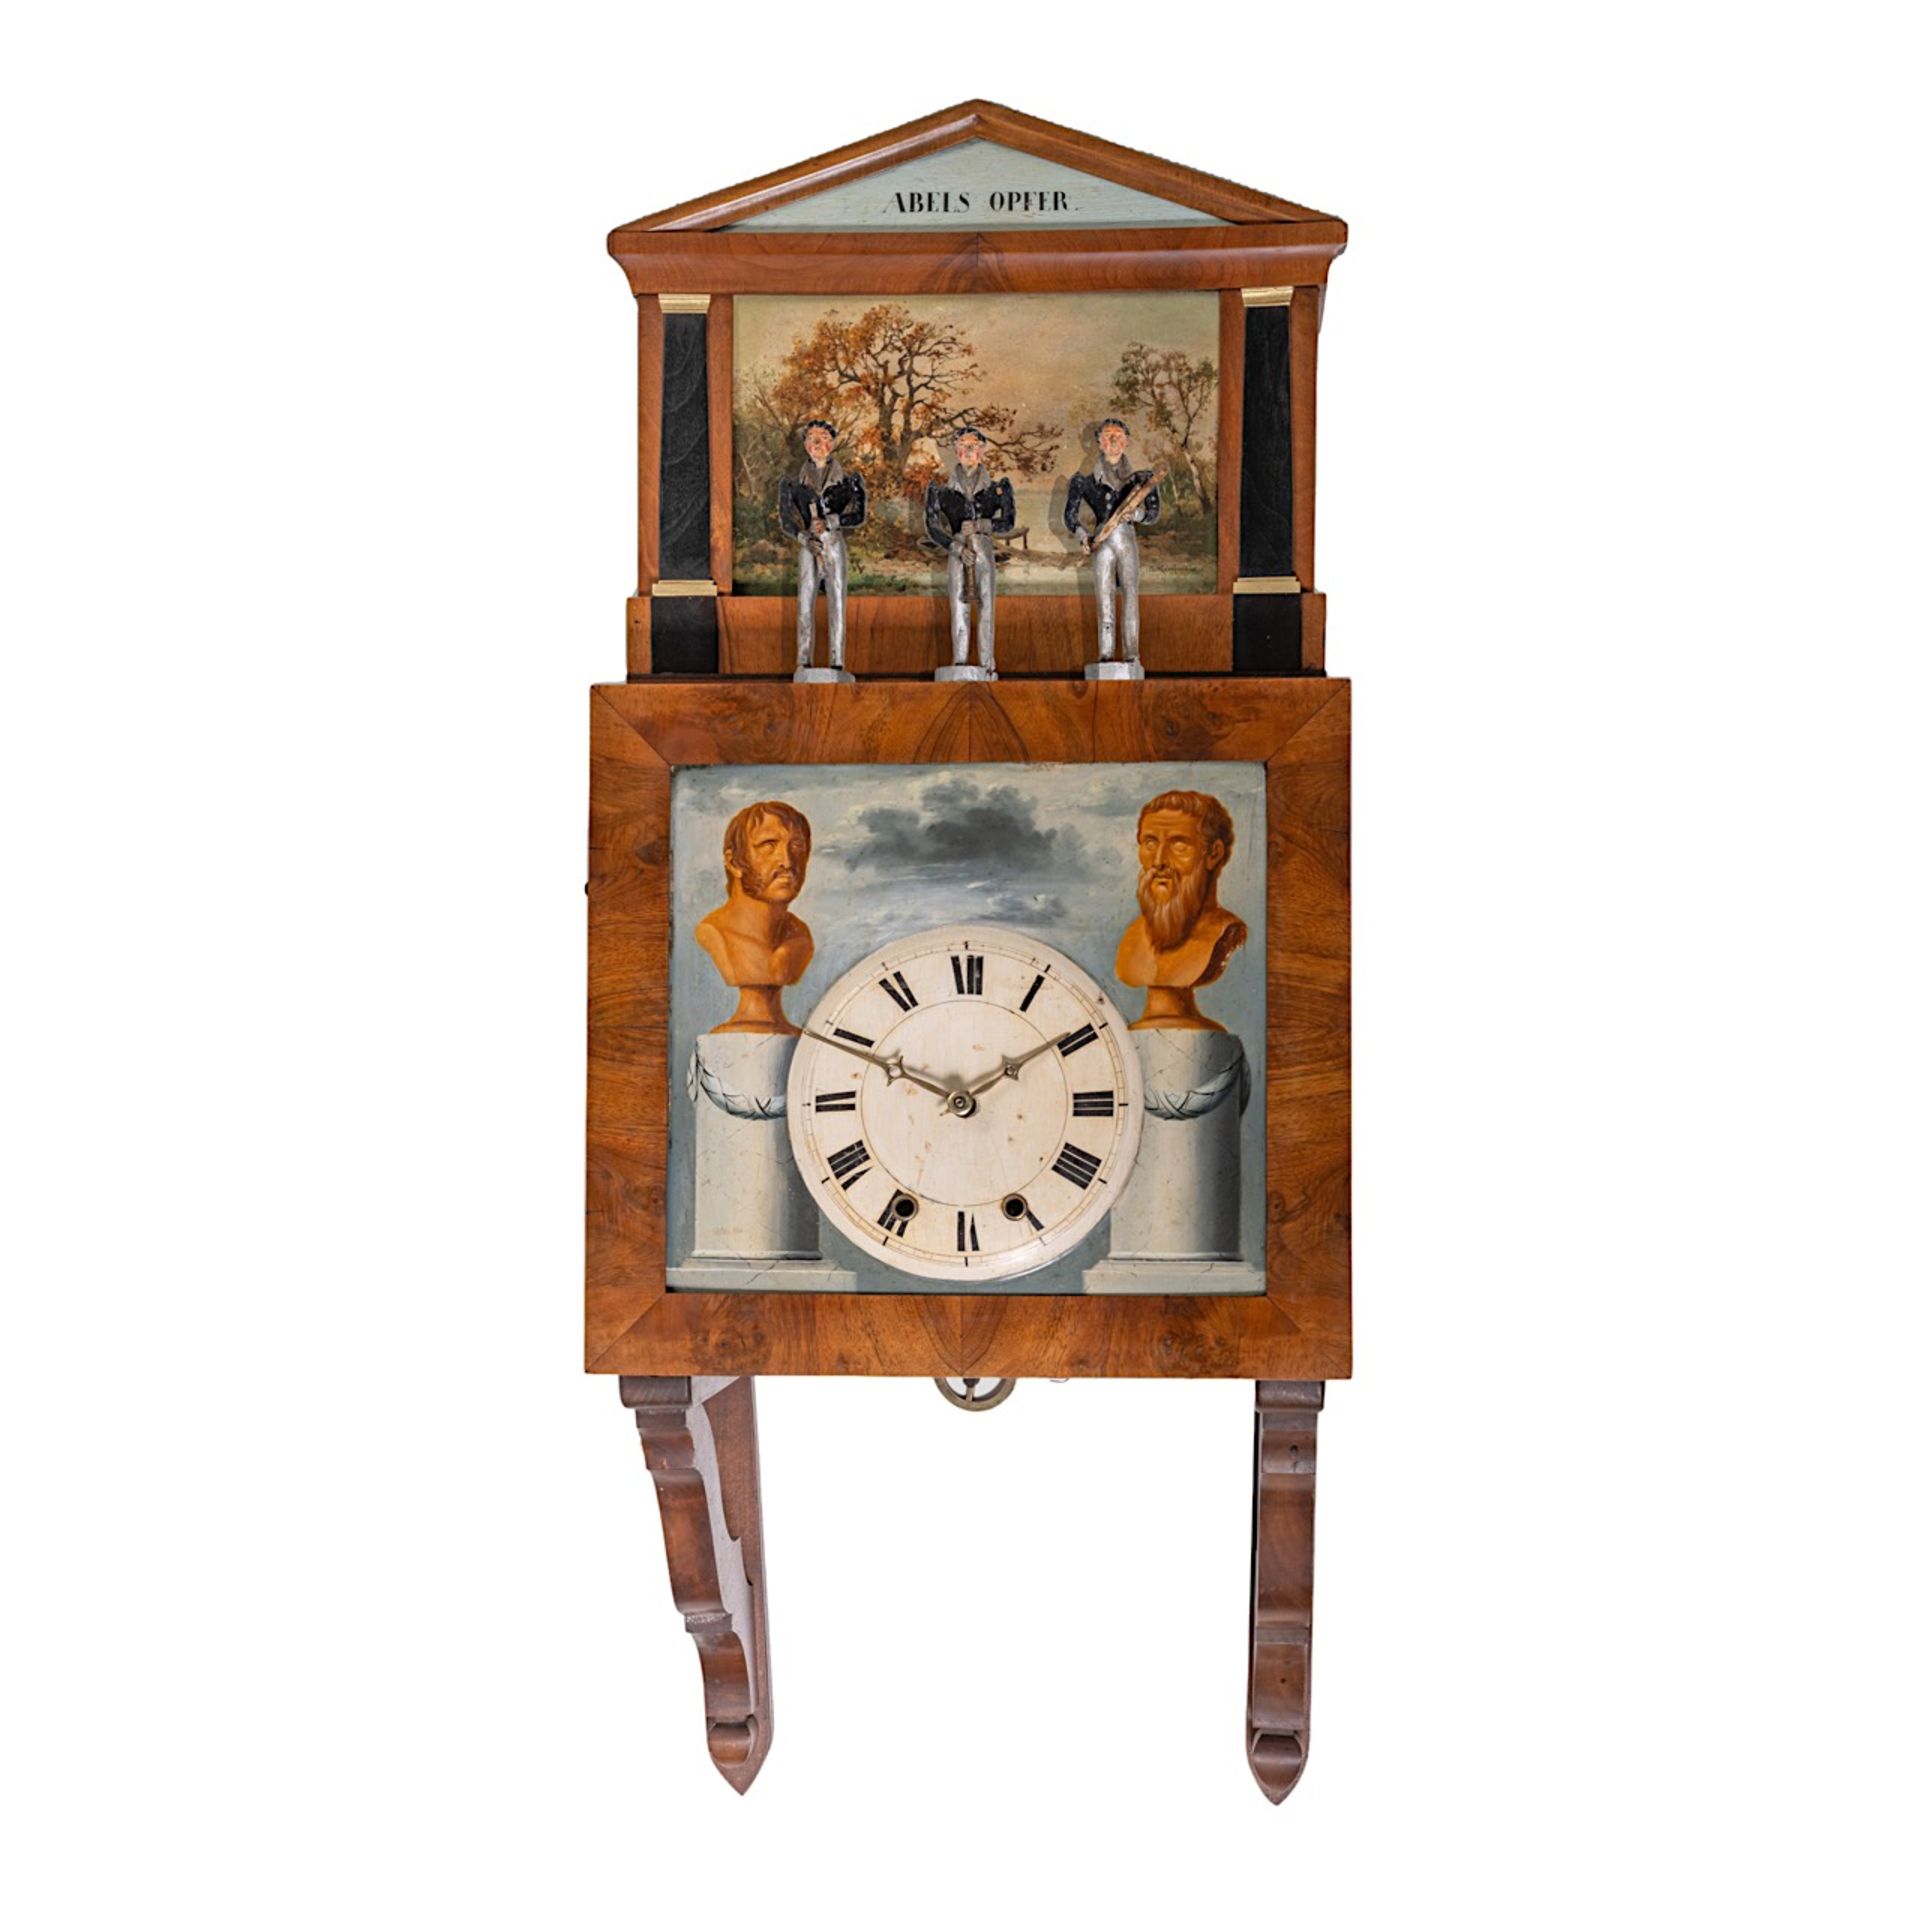 An exceptional Black Forest Biedermeier 'Abels Opfer' musical clock with automation, 19thC, H 81 - W